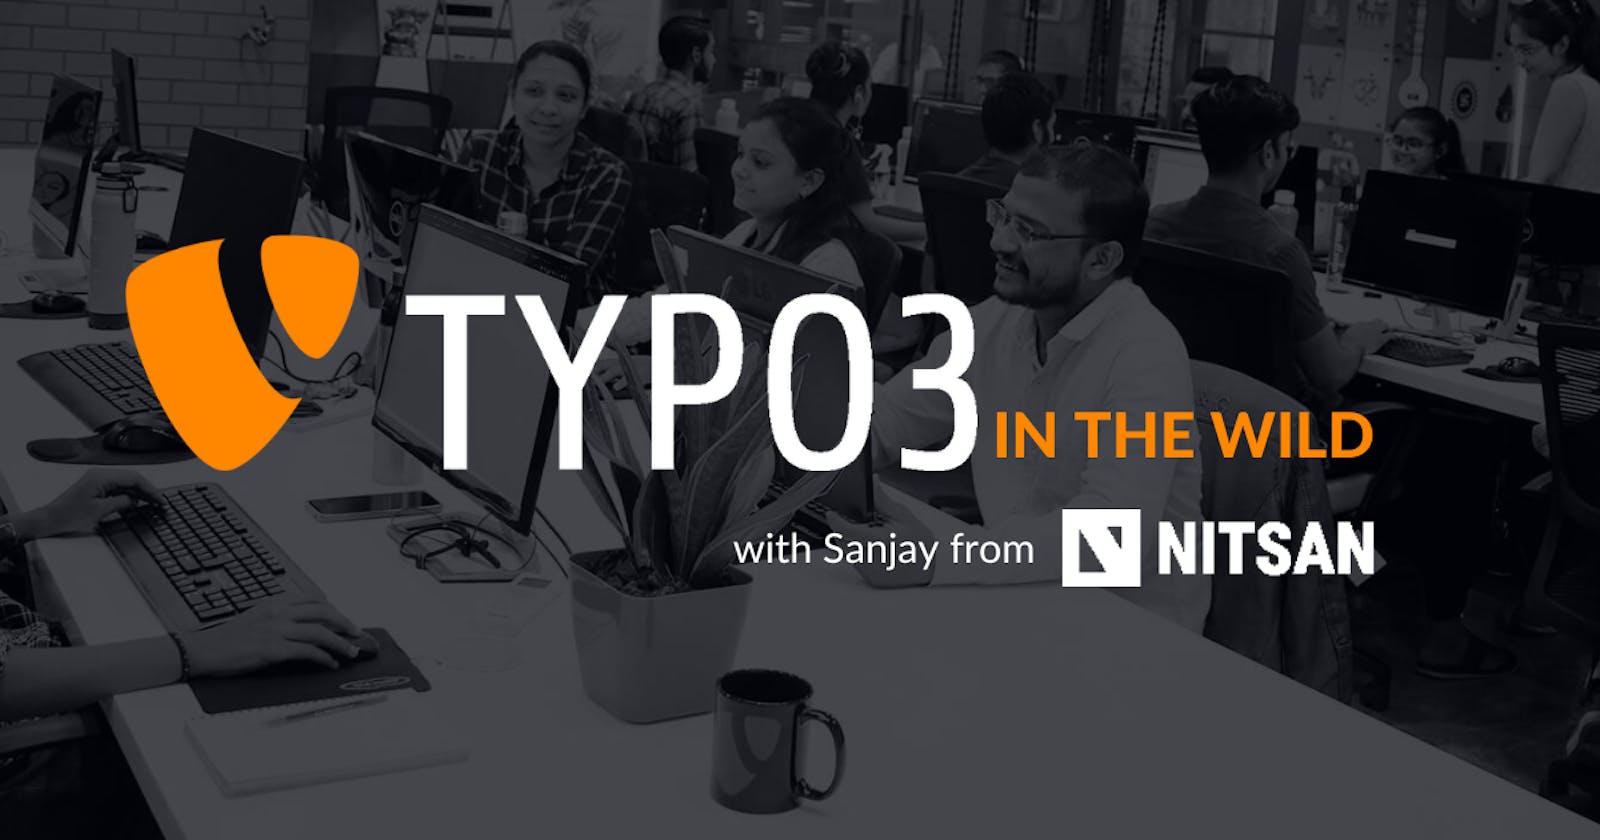 TYPO3 In The Wild: An Interview with Sanjay from NITSAN